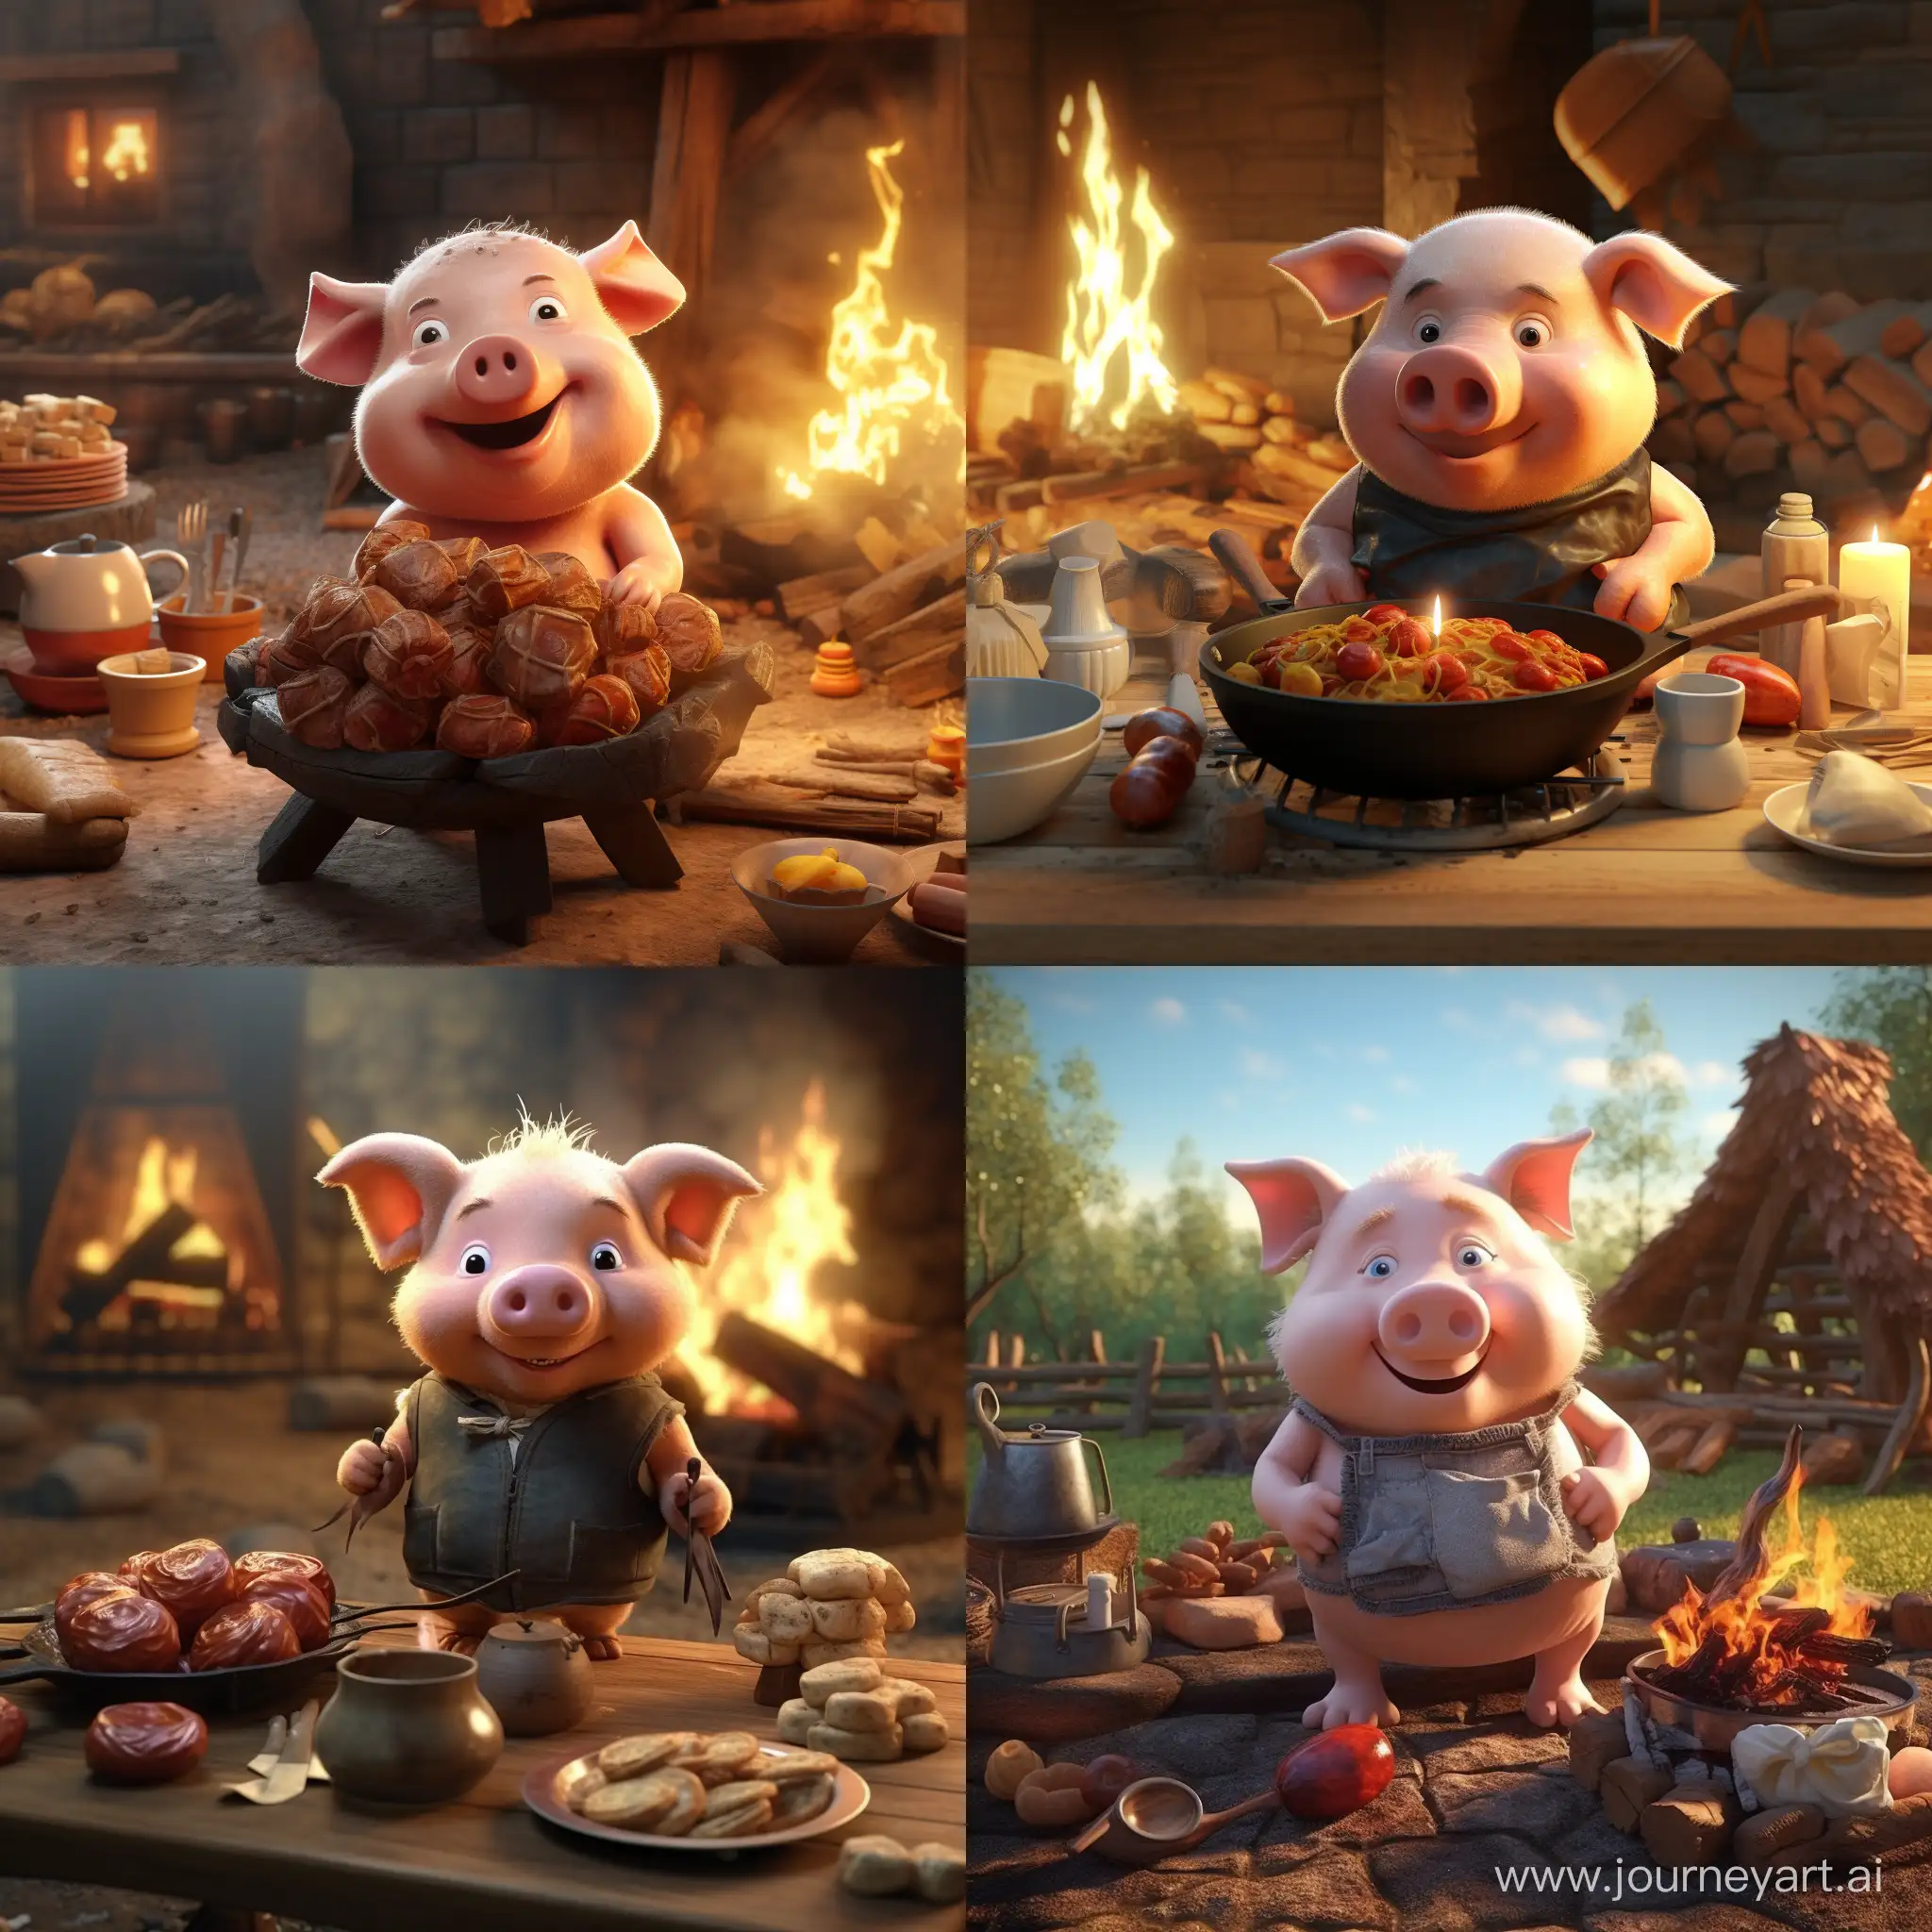 Sizzling-3D-Animation-of-a-Roast-Piglet